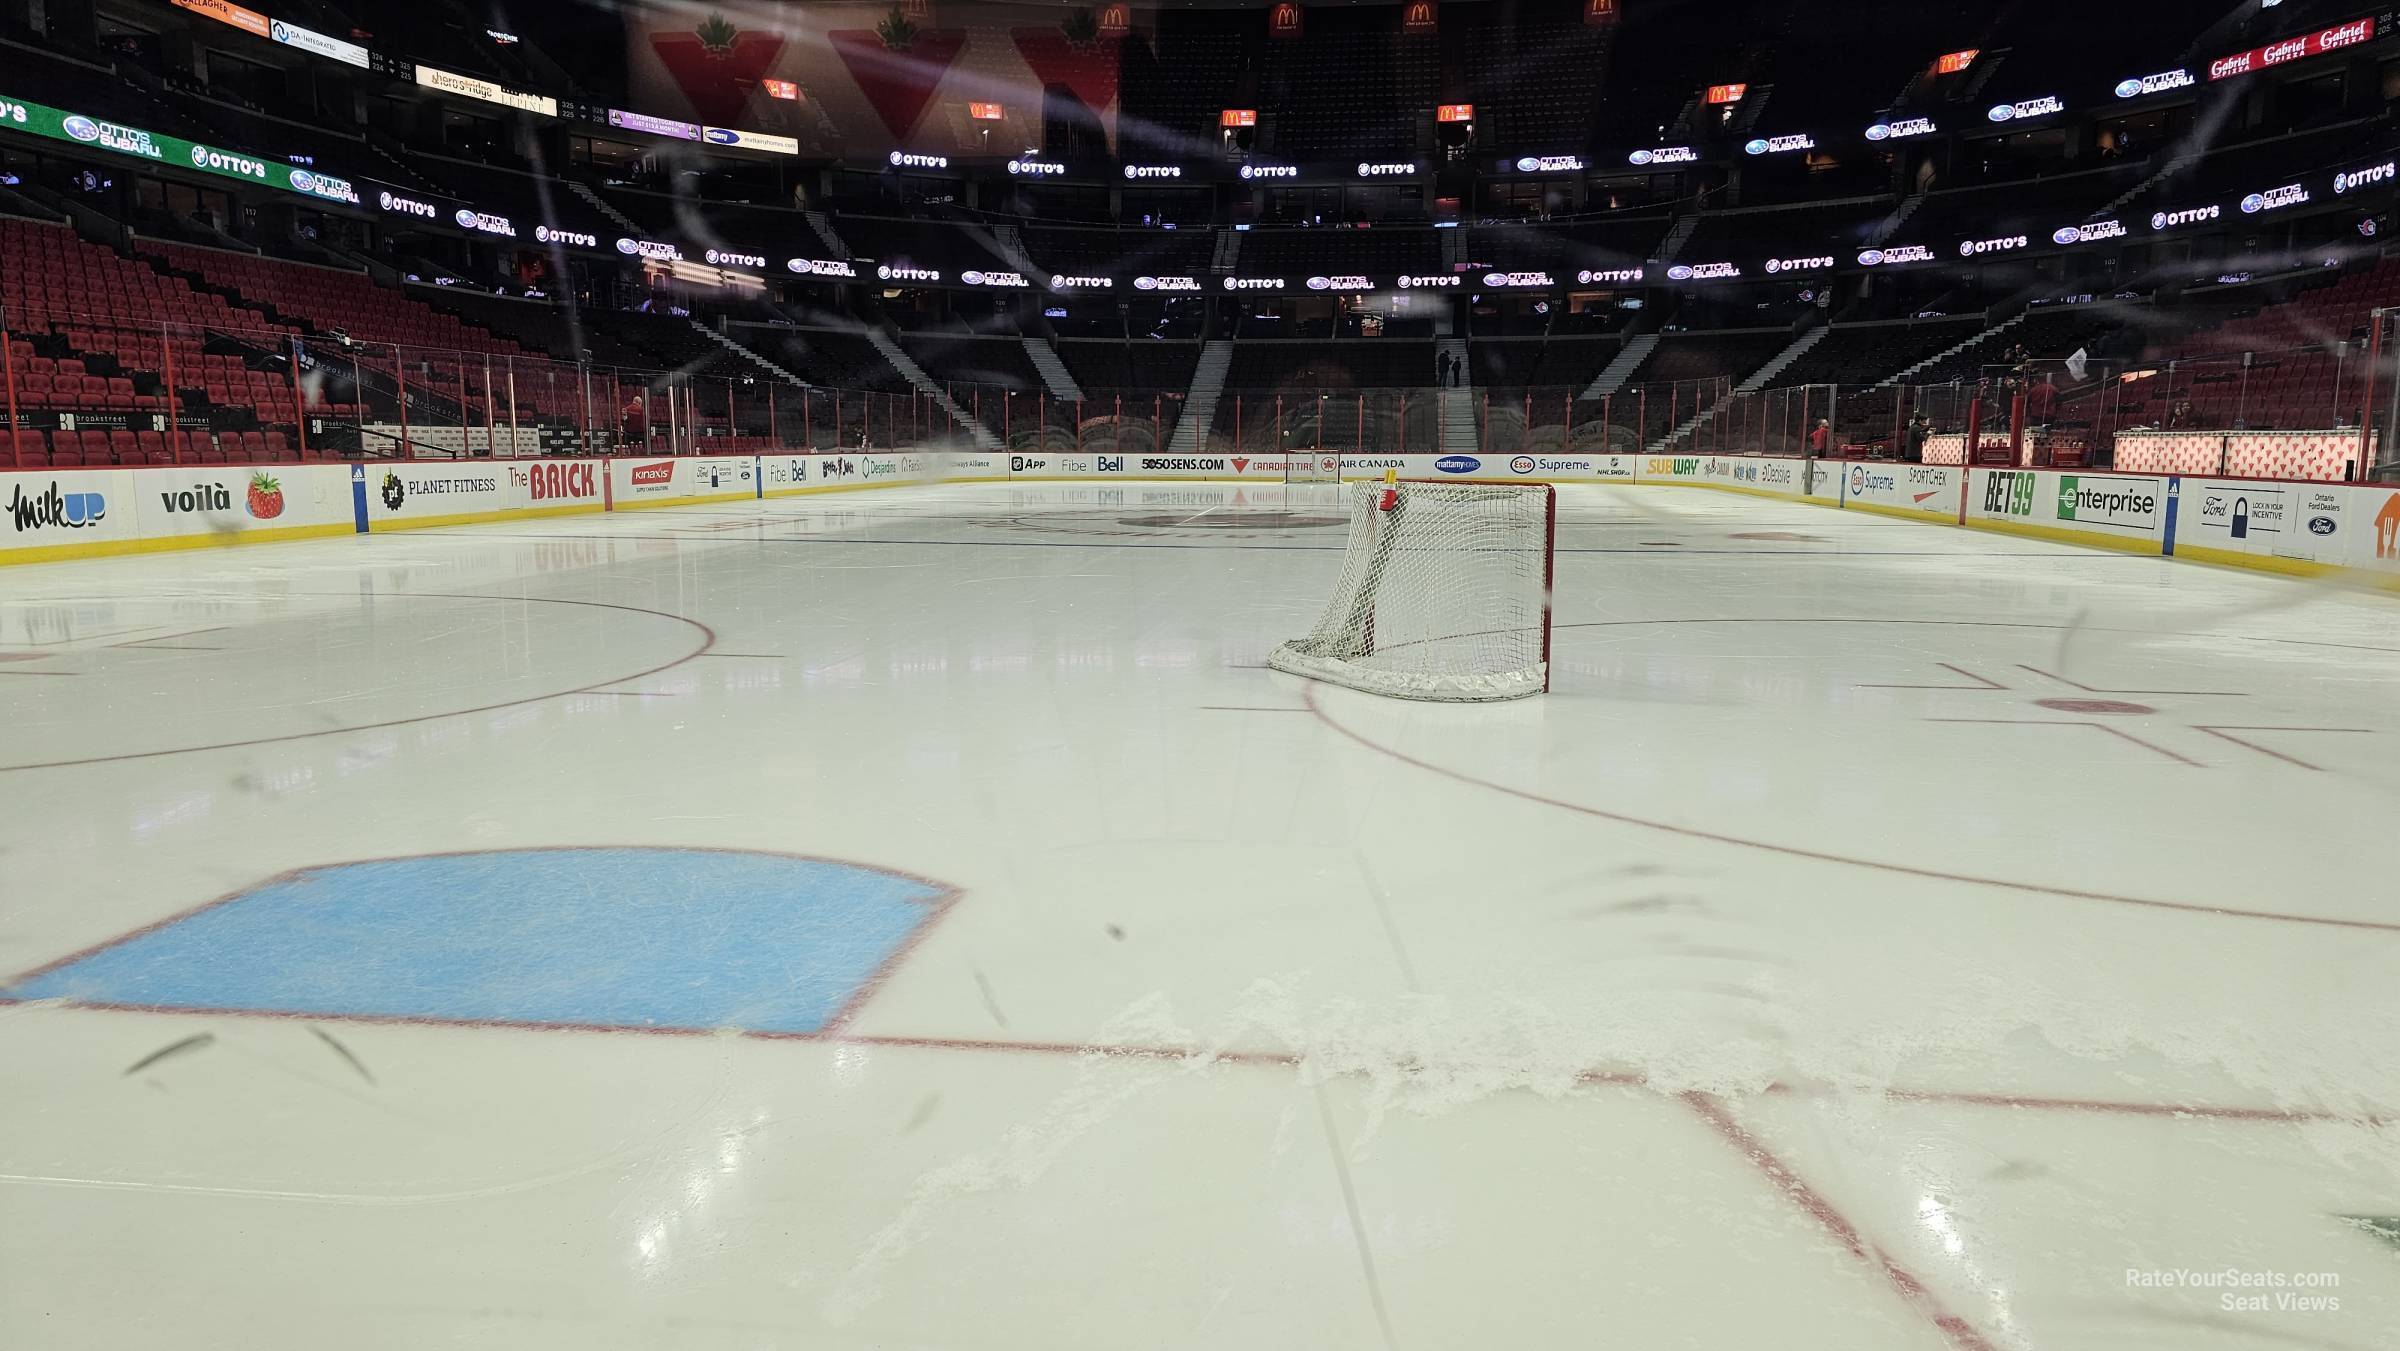 section 111, row a seat view  for hockey - canadian tire centre